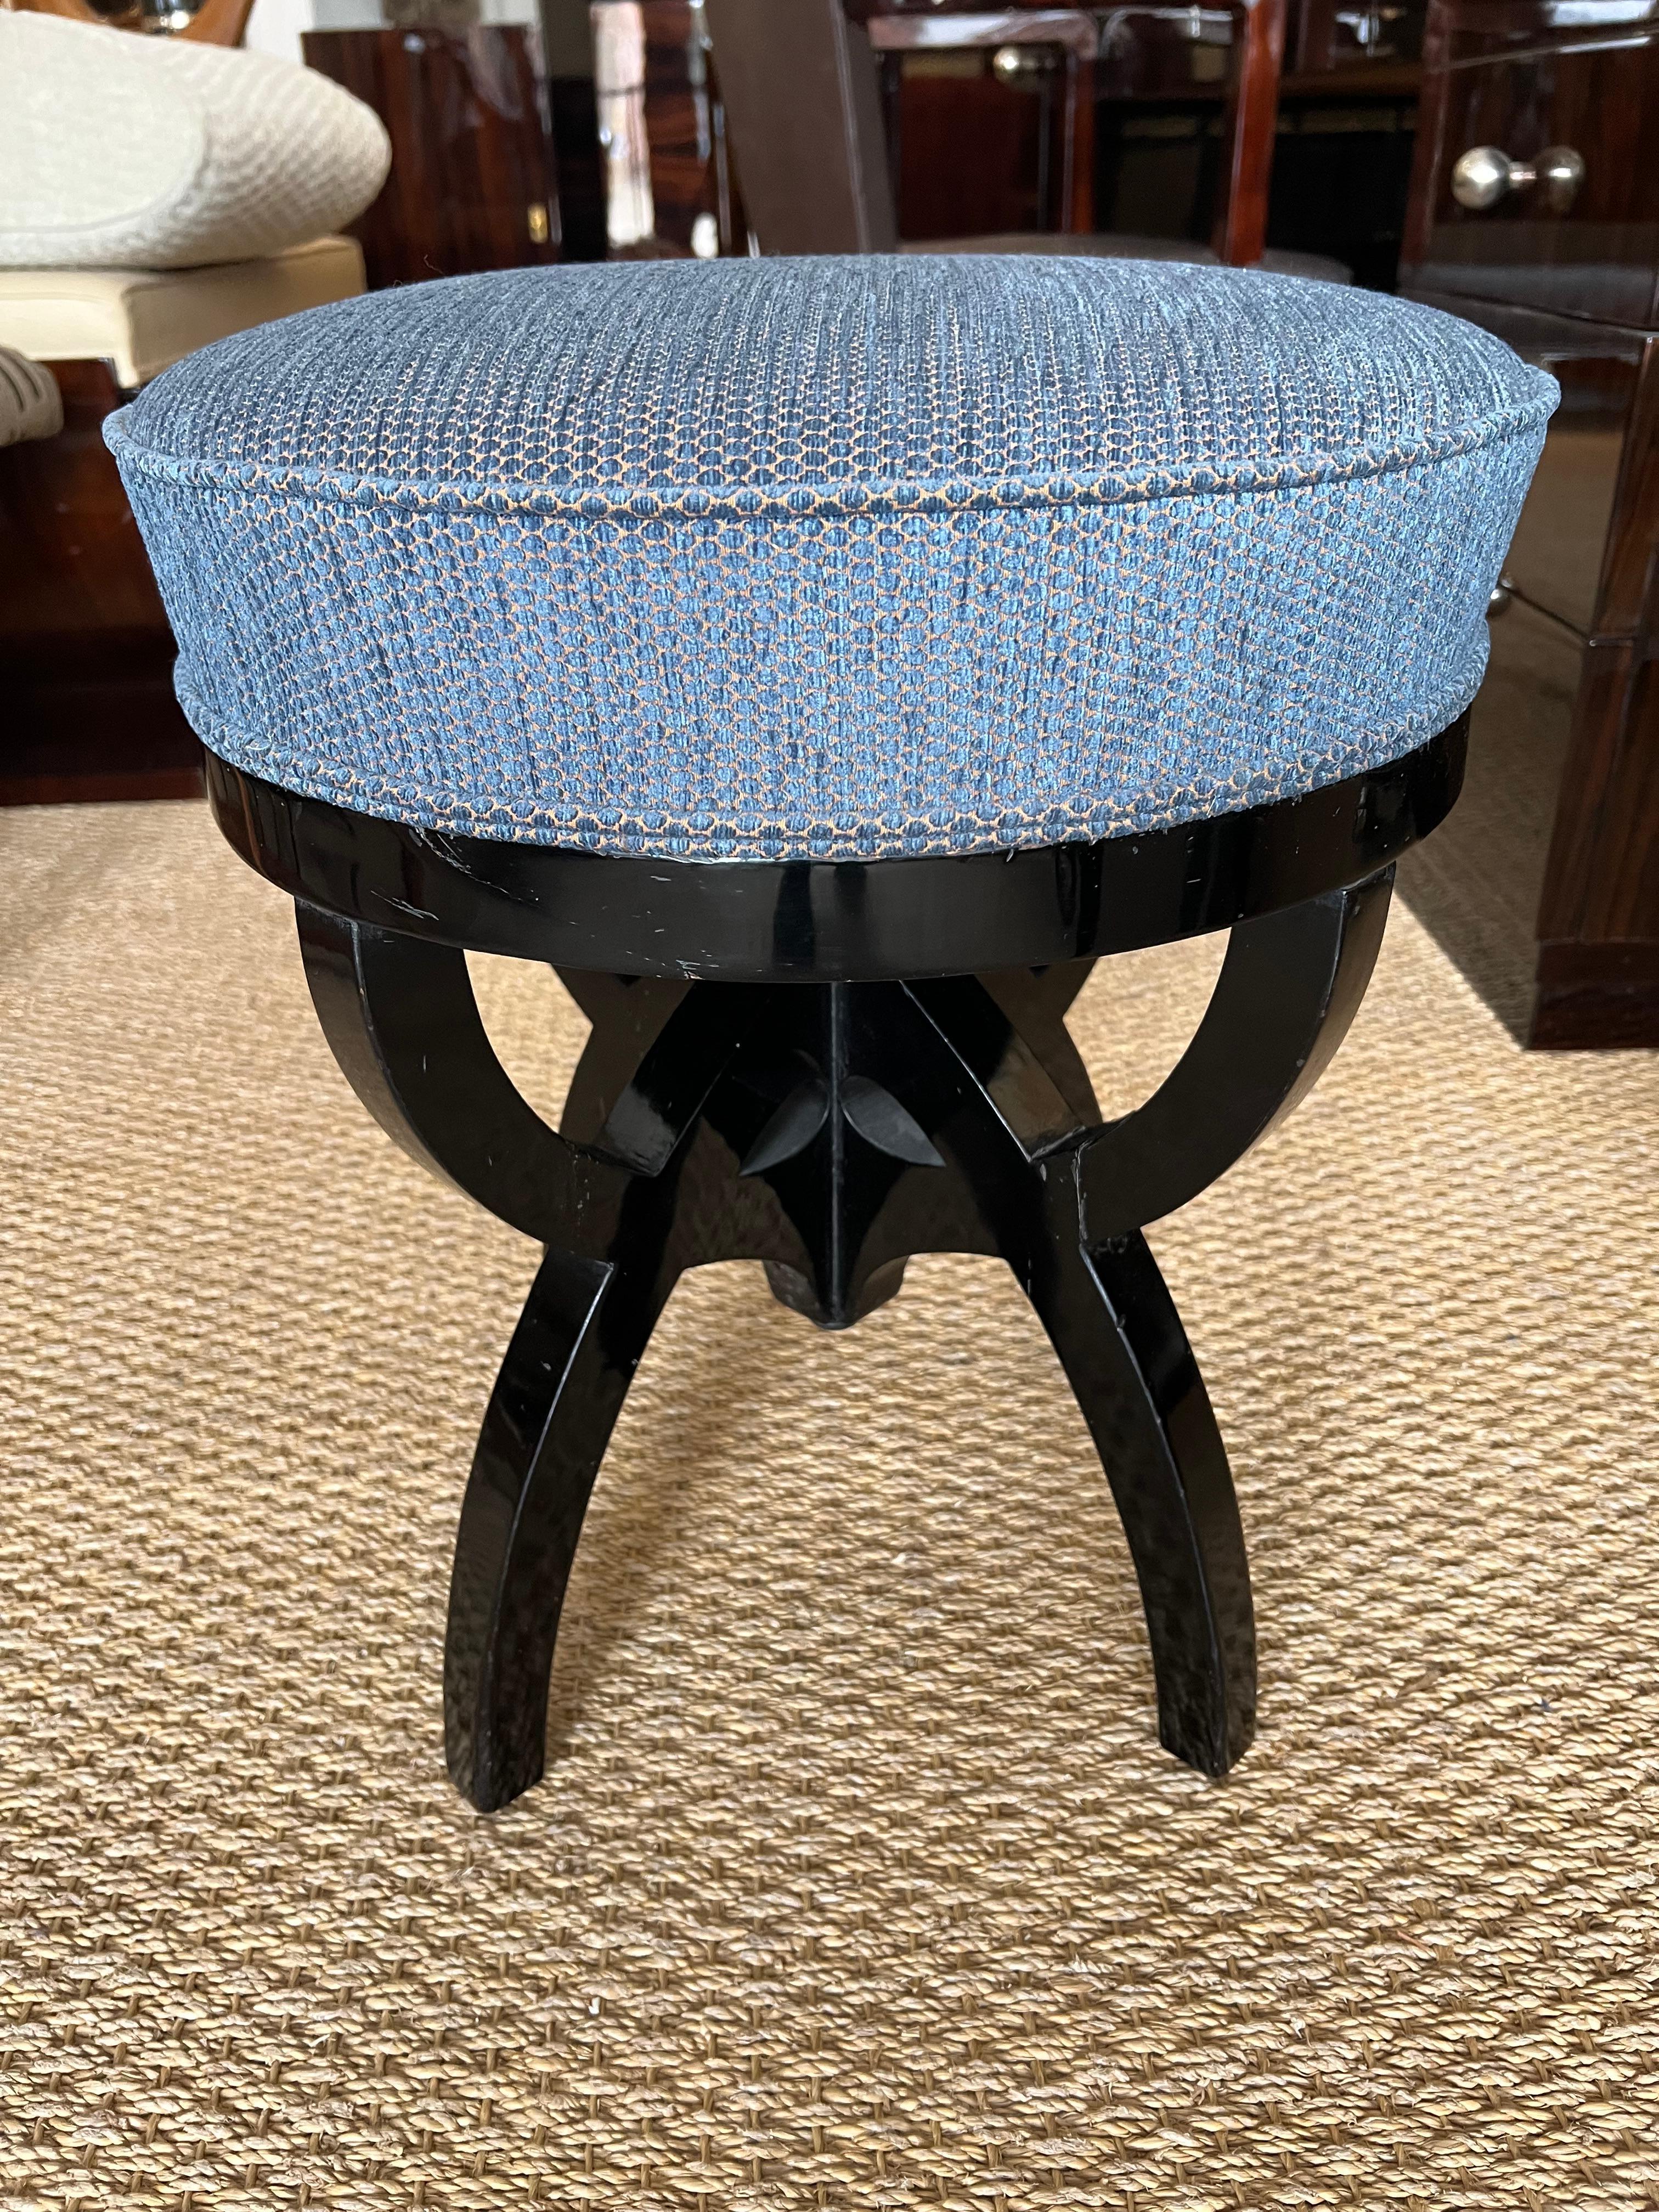 Art Nouveau Austrian ottoman is made out of ebonized walnut wood. Re-upholstered in blue fabric. It has 4 curved legs that are connected  with each other on top. 
Austria c. 1910-1920s
18